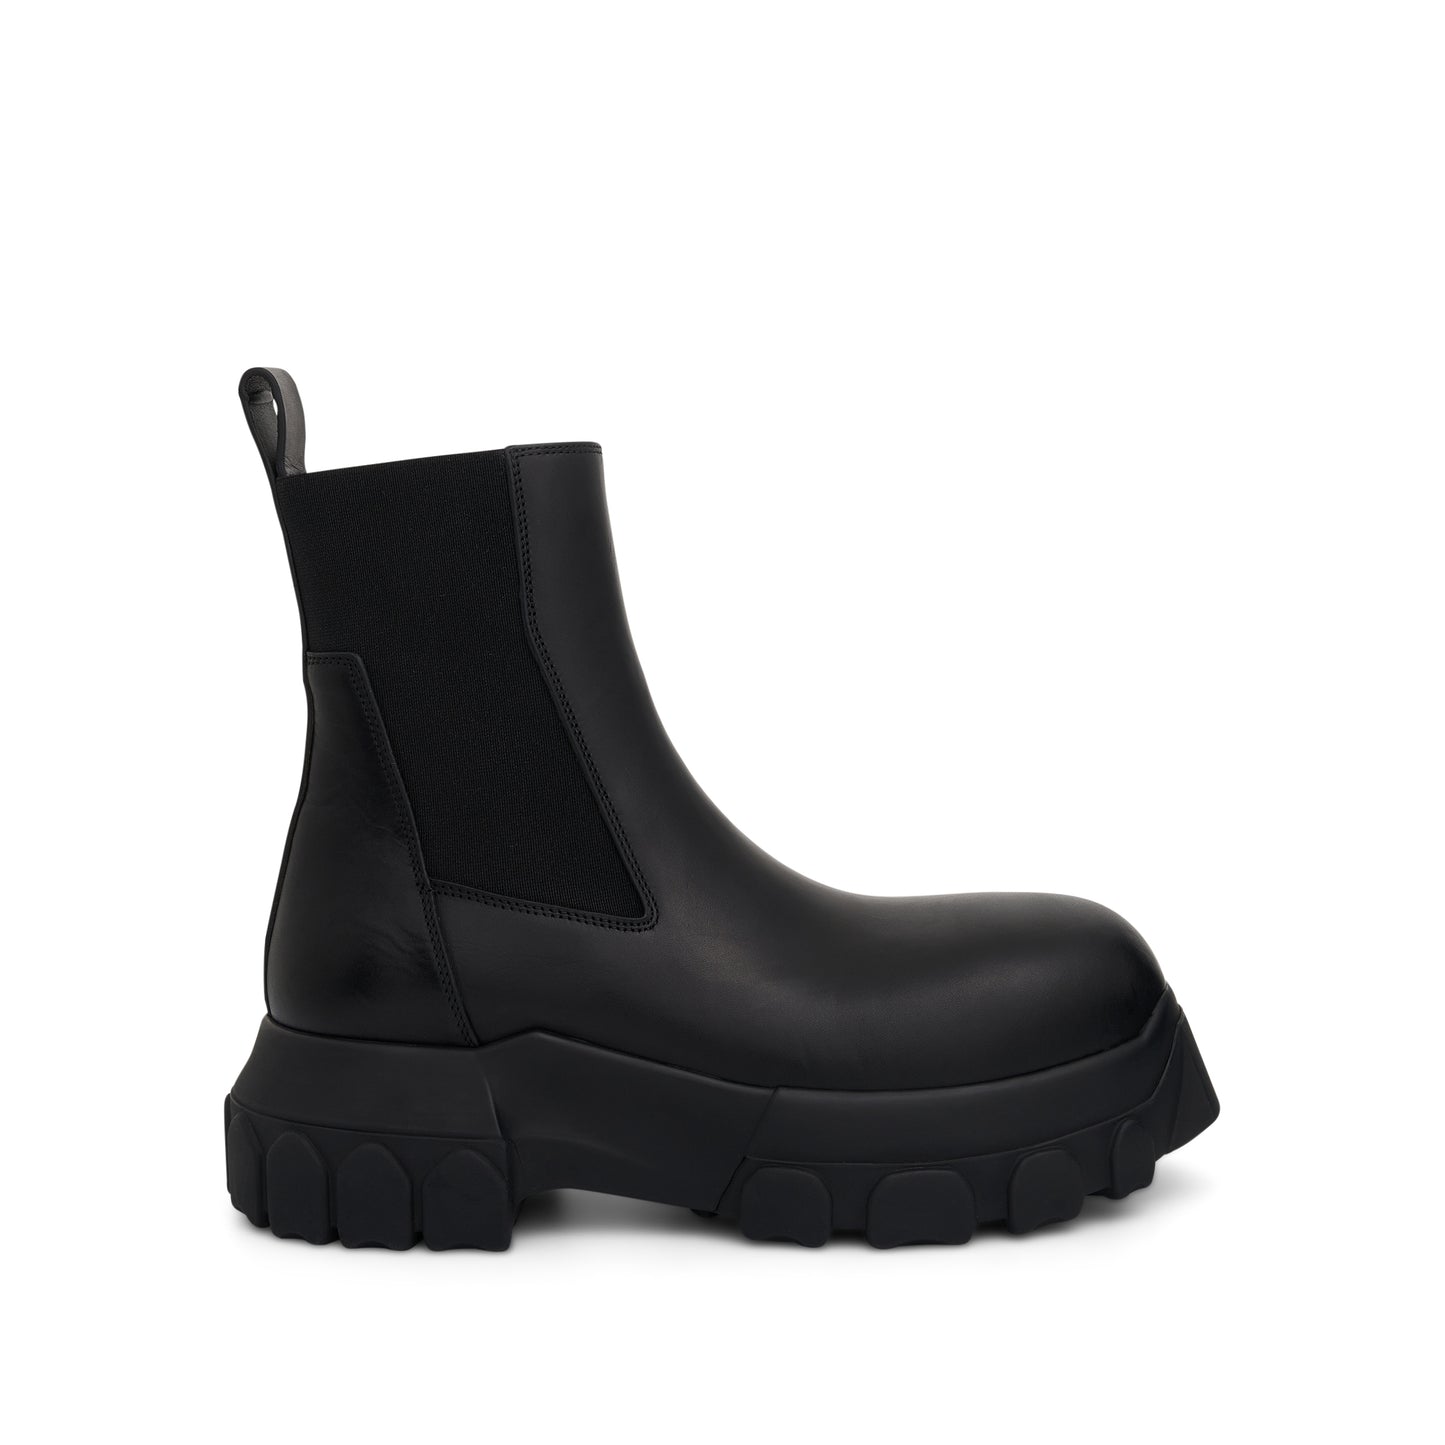 Beatle Bozo Tractor Leather Boots in Black